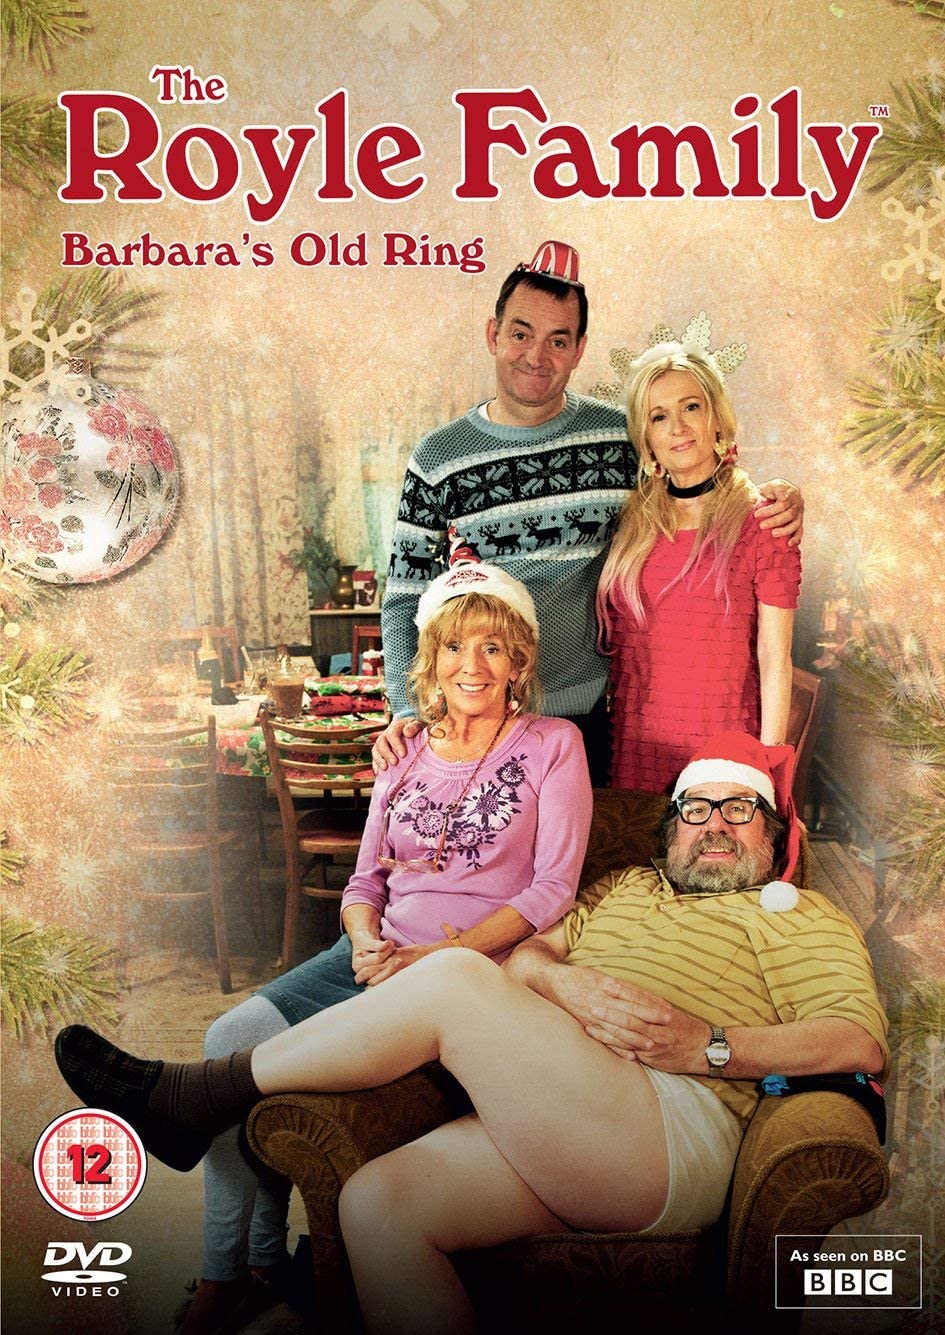 The Royle Family: Barbara's Old Ring [DVD]